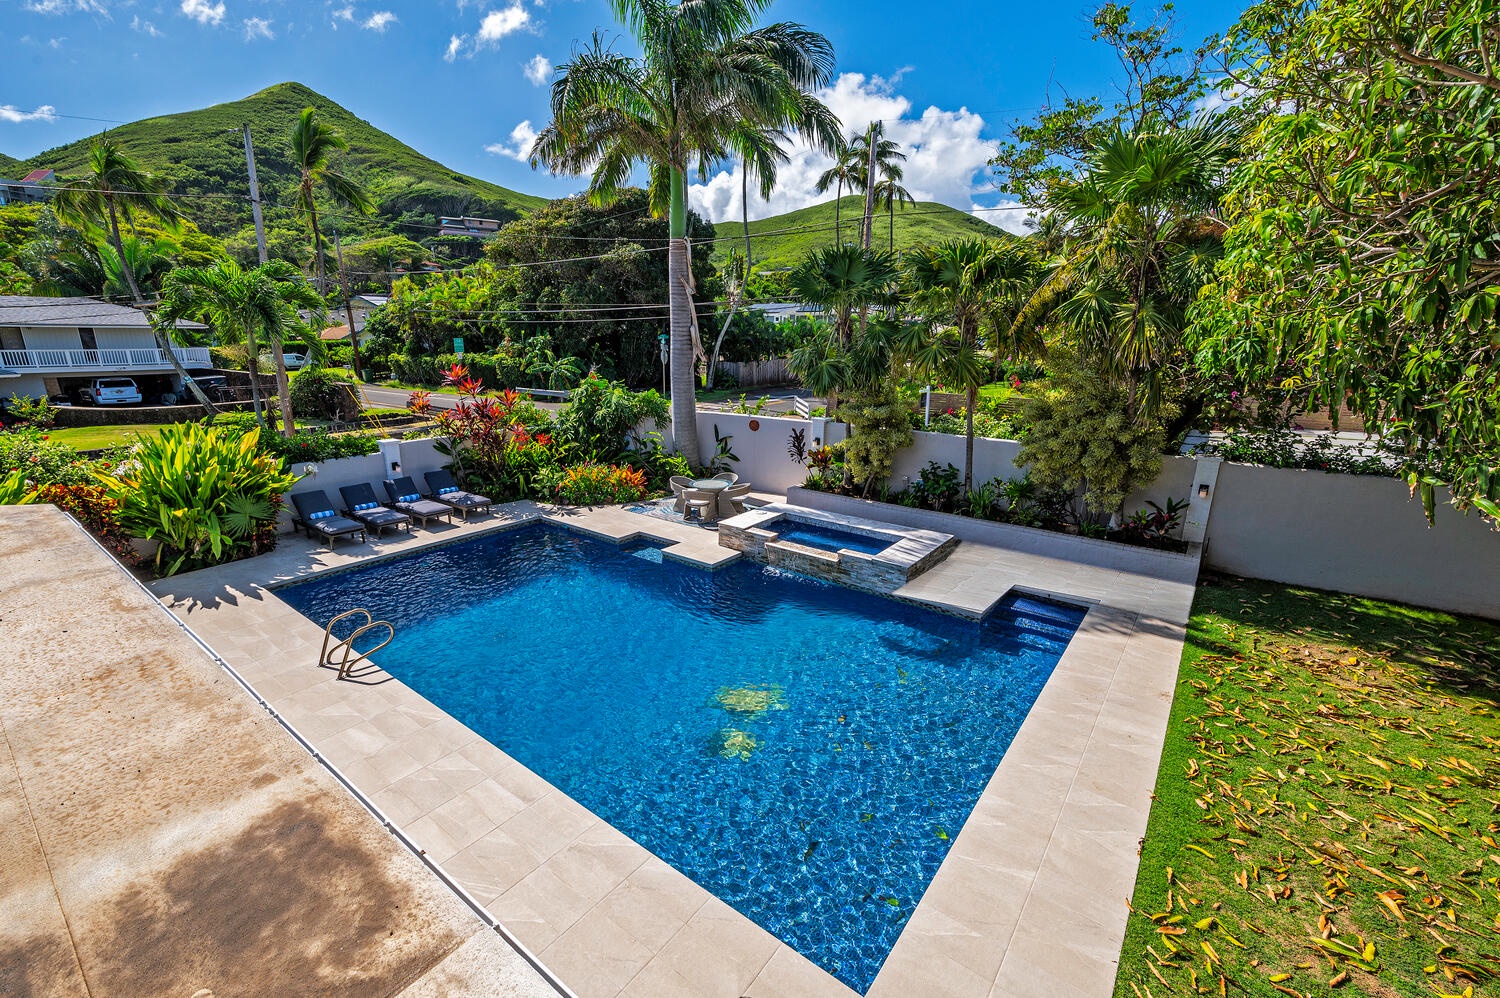 Kailua Vacation Rentals, Villa Hui Hou - Birds eye view of the pool from the media room lanai. (Note: Upper pool area is apart of the pool and NOT a spa)